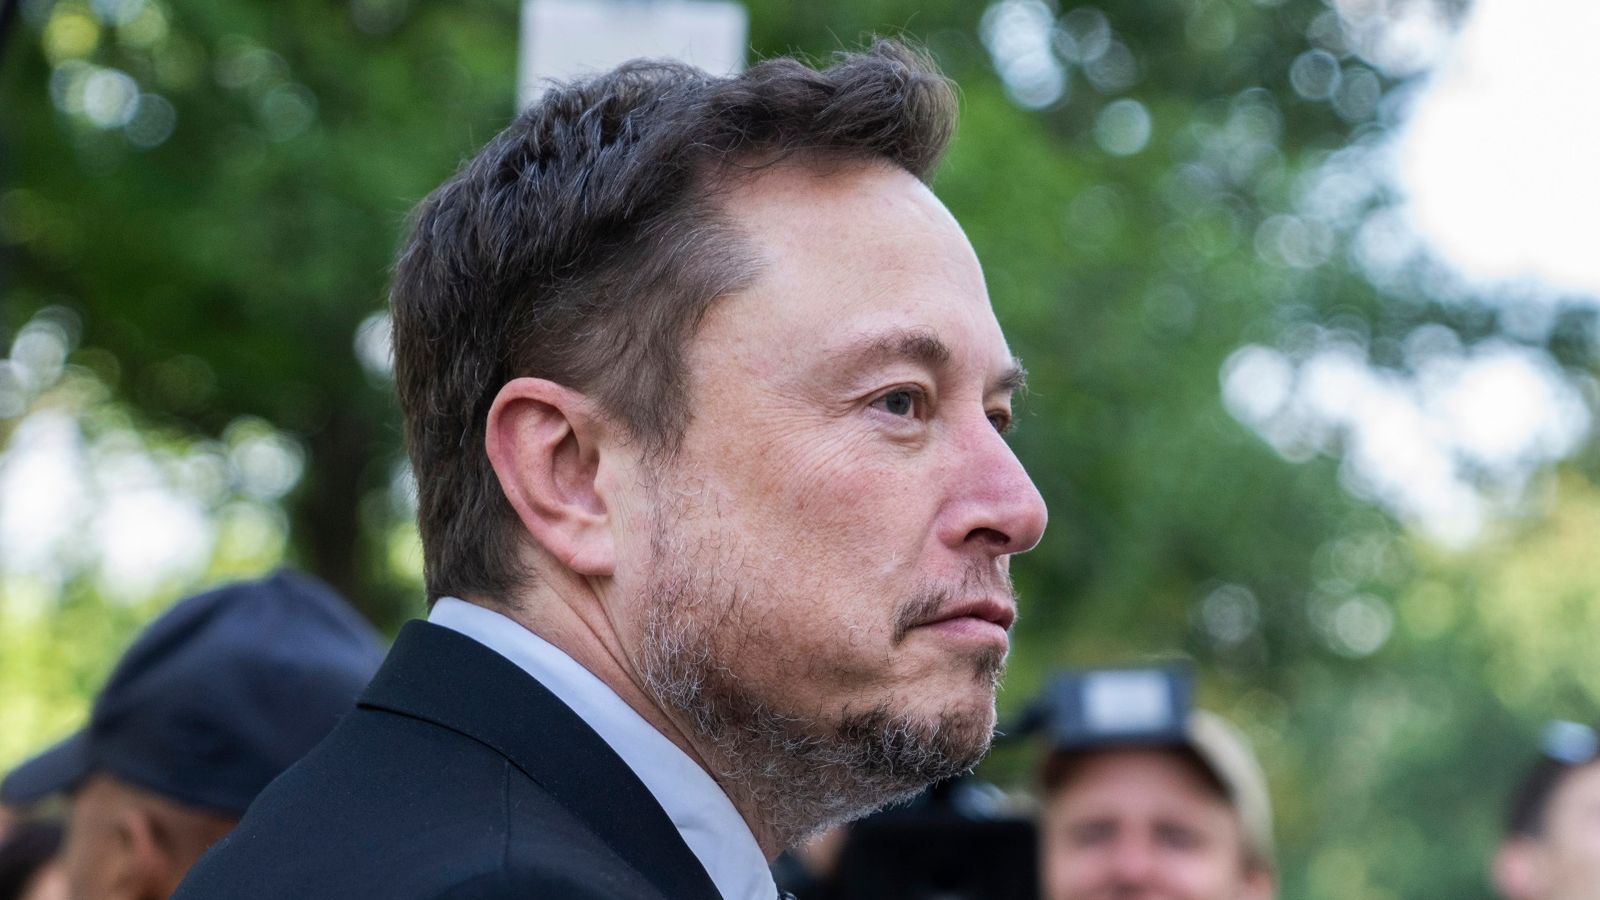 Elon Musk refuses to answer if his ‘ignorance and ego’ cost Ukrainian lives